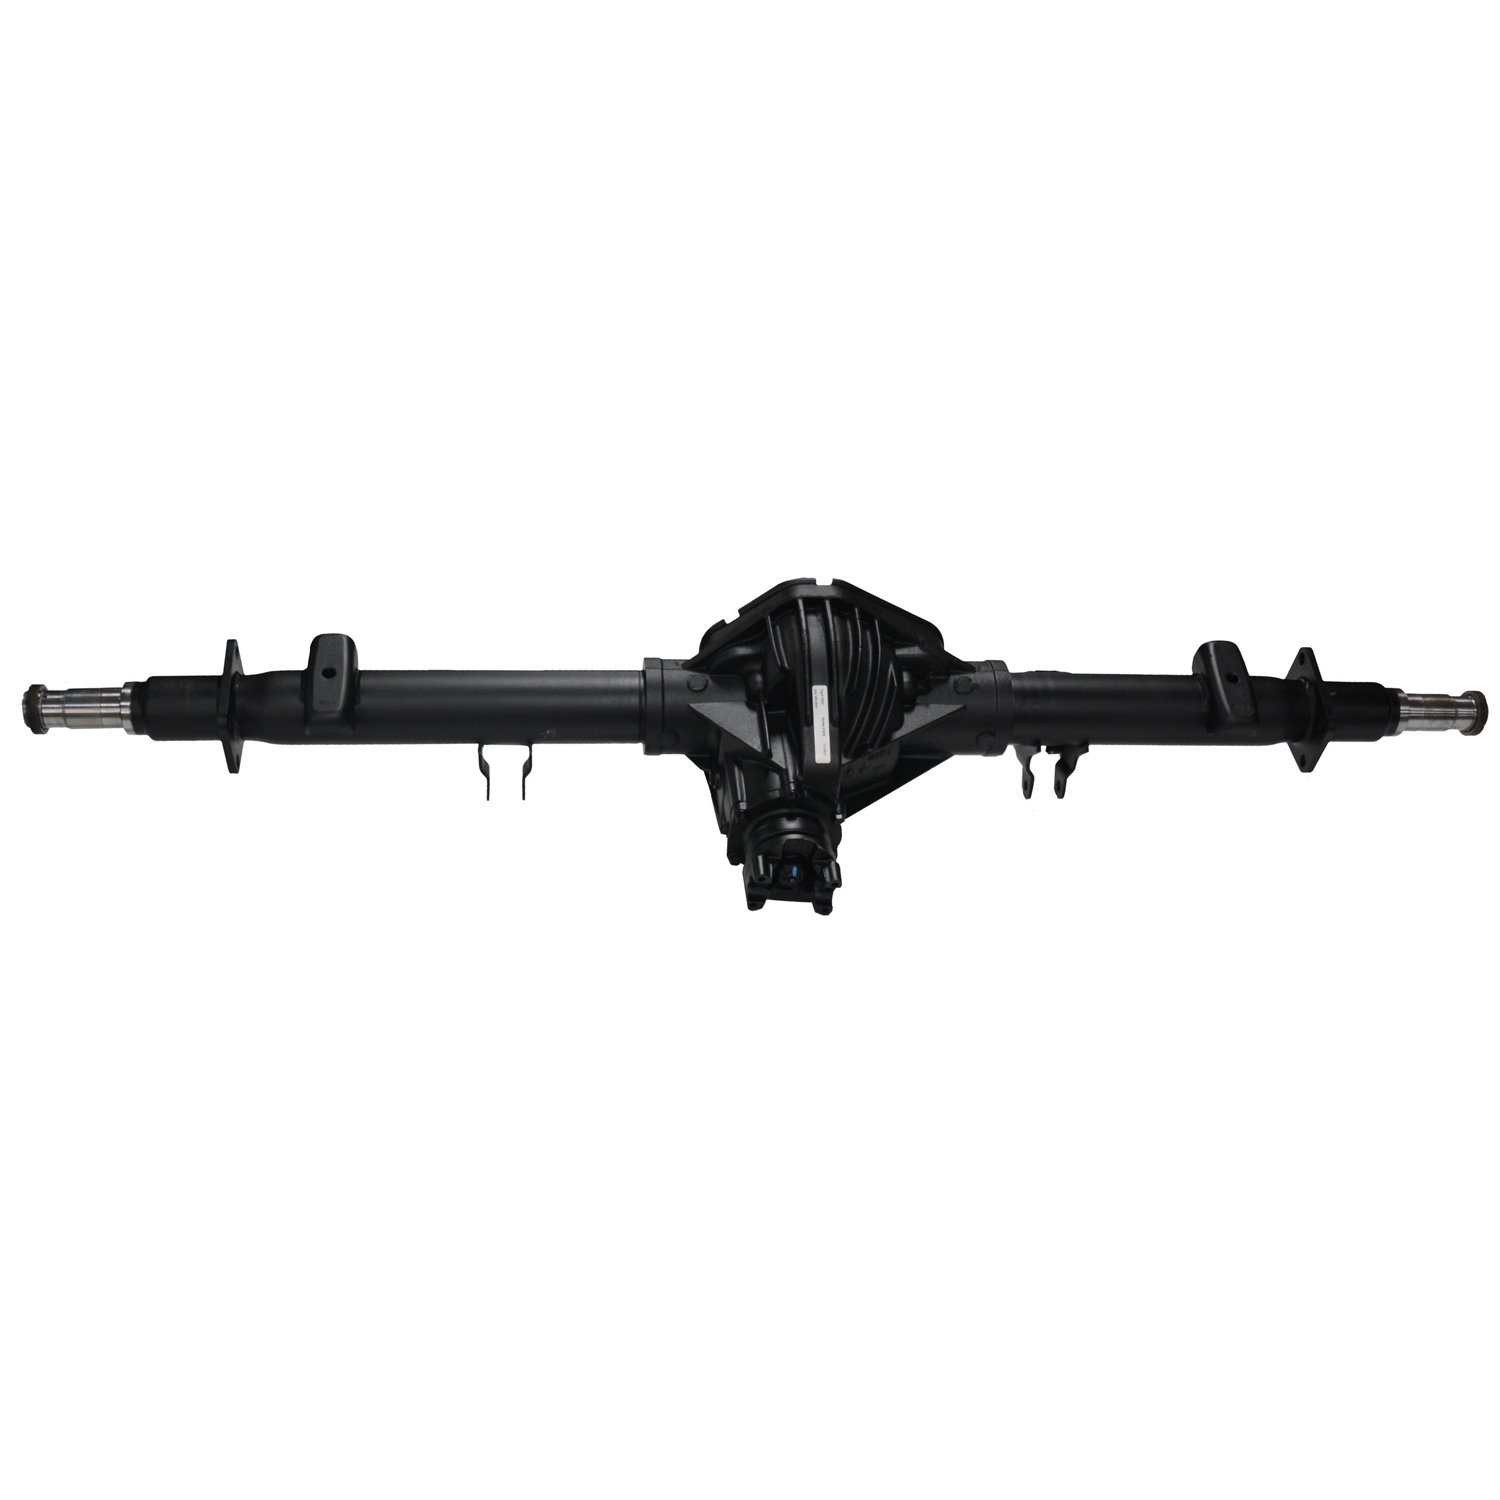 Remanufactured Complete Axle Assembly for Dana 70 03-09 GM Van 3500 4.11 , DRW, Cutaway